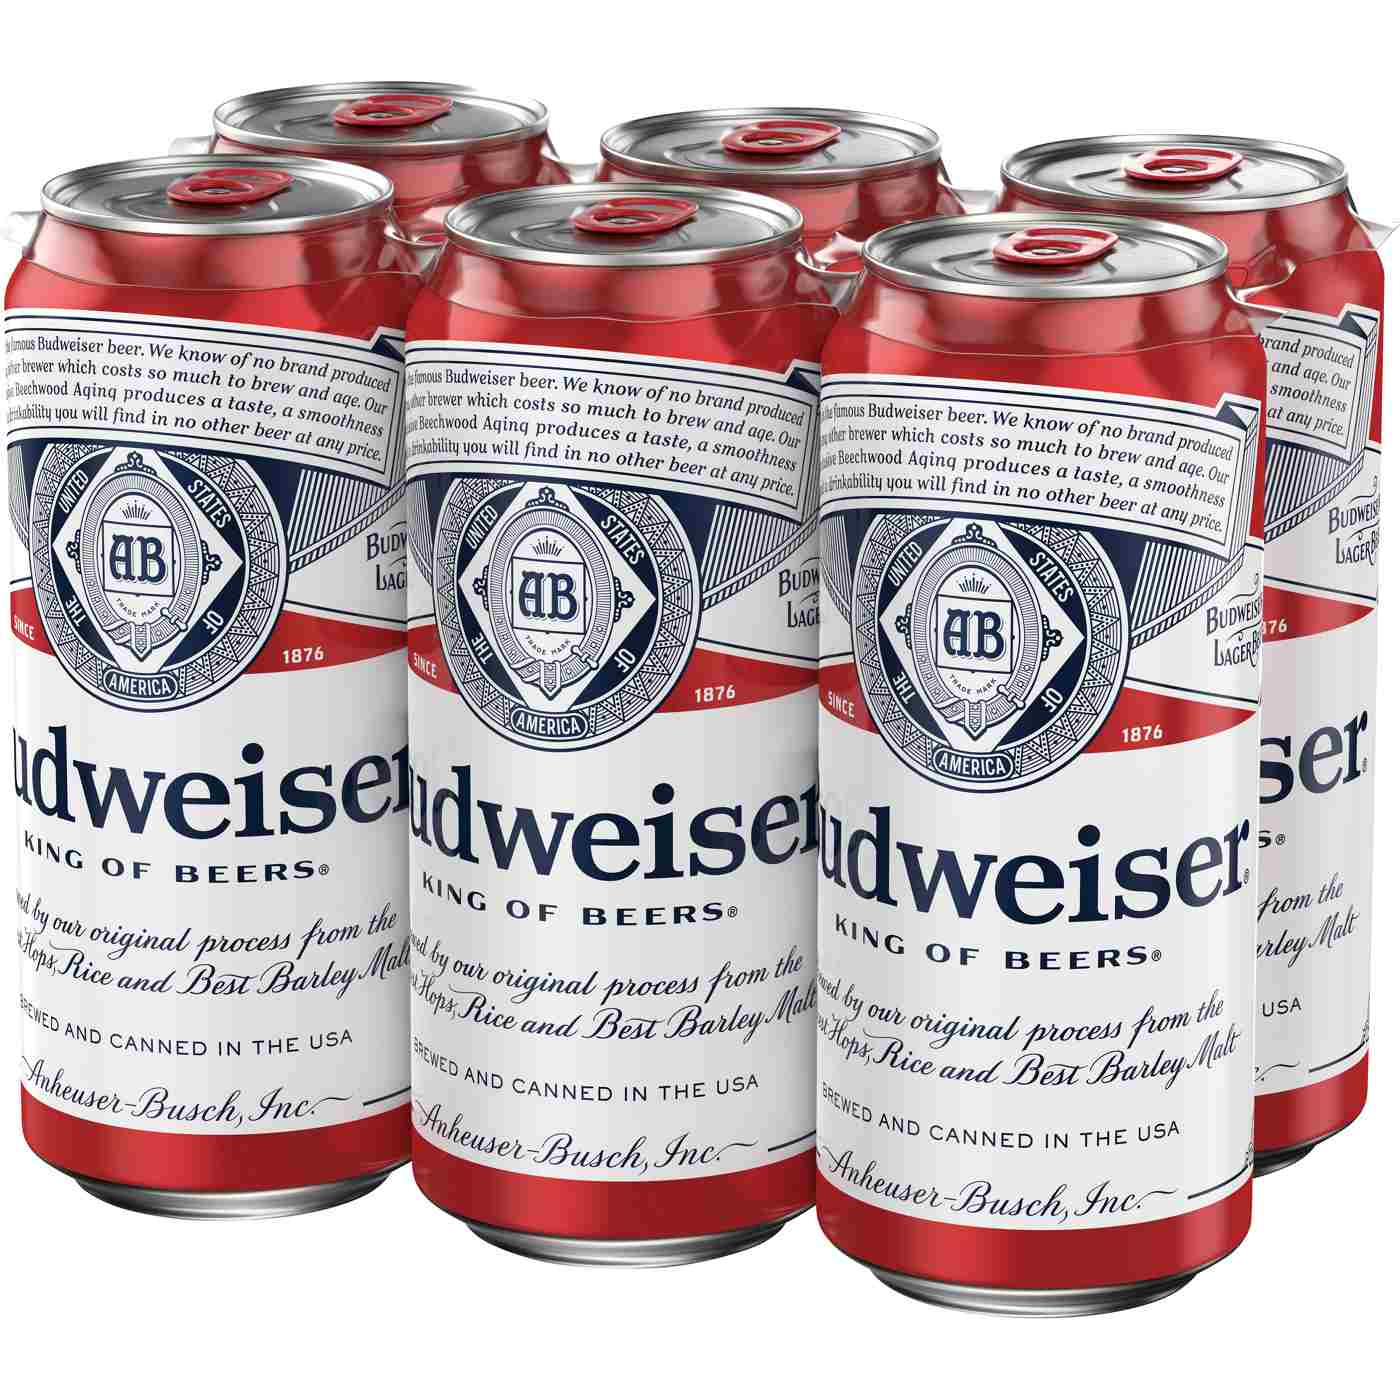 Budweiser Beer 6 pk Cans; image 2 of 3